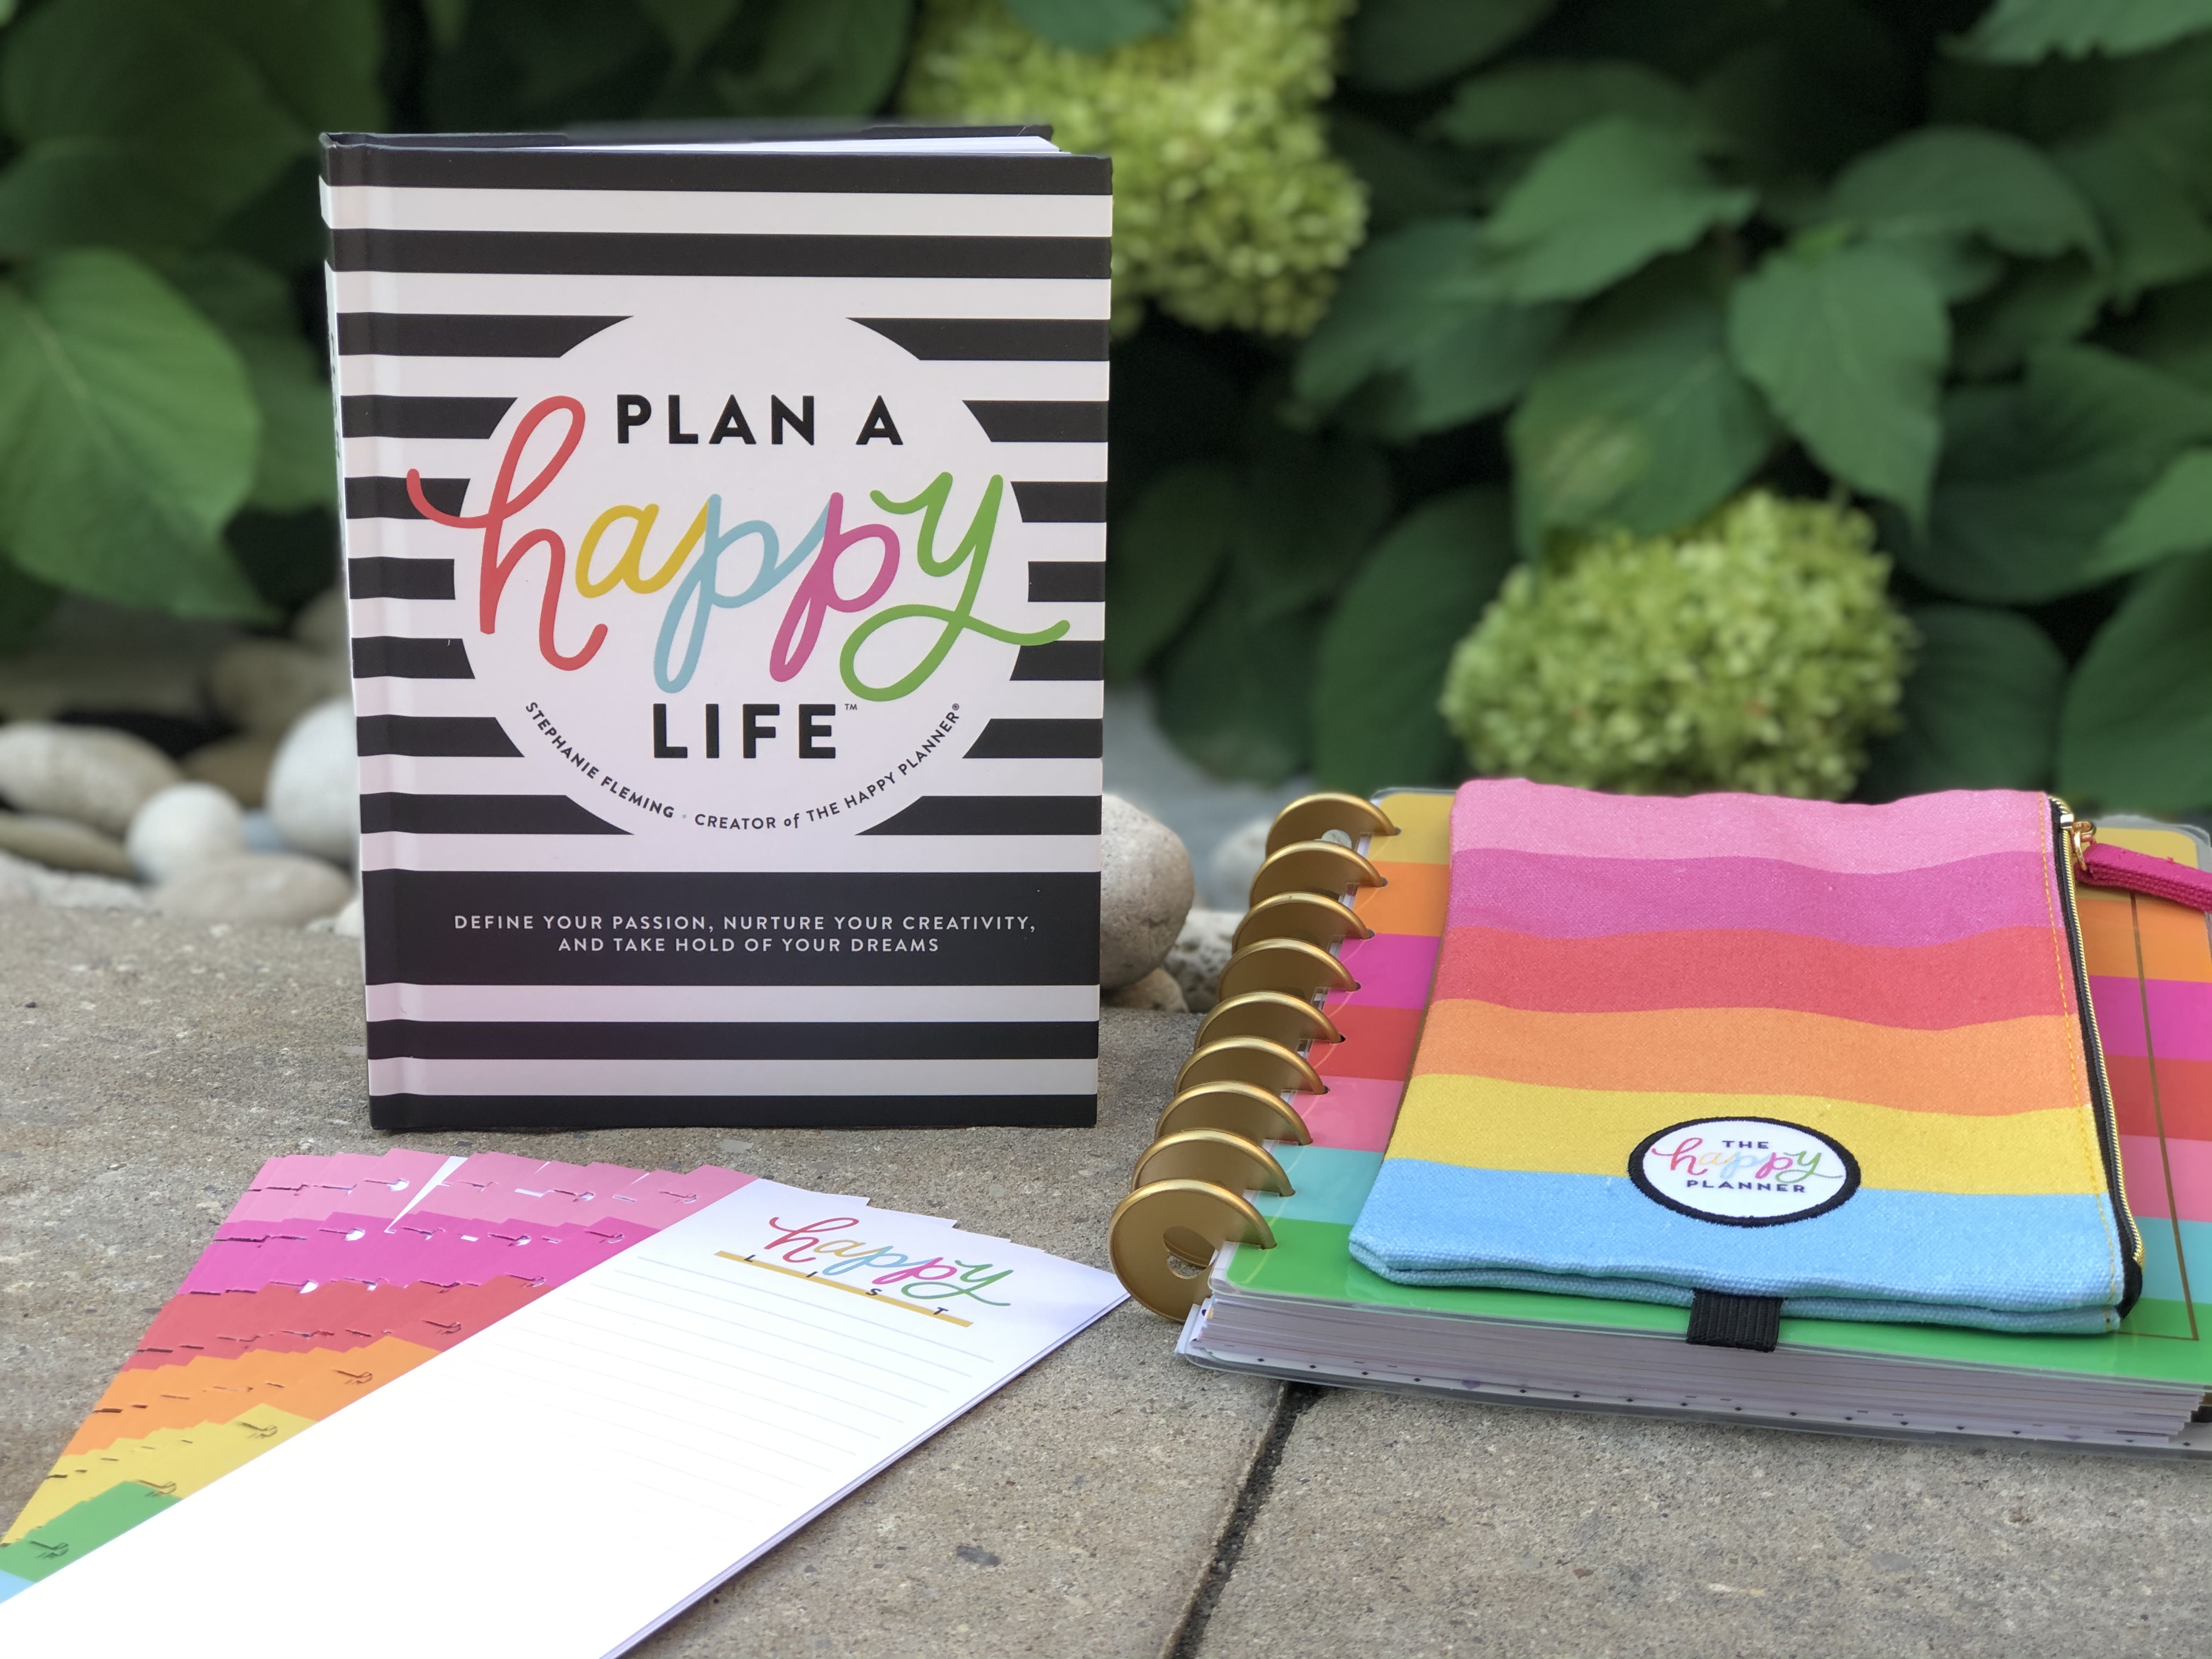 Plan a happy life book and happy planner accessories